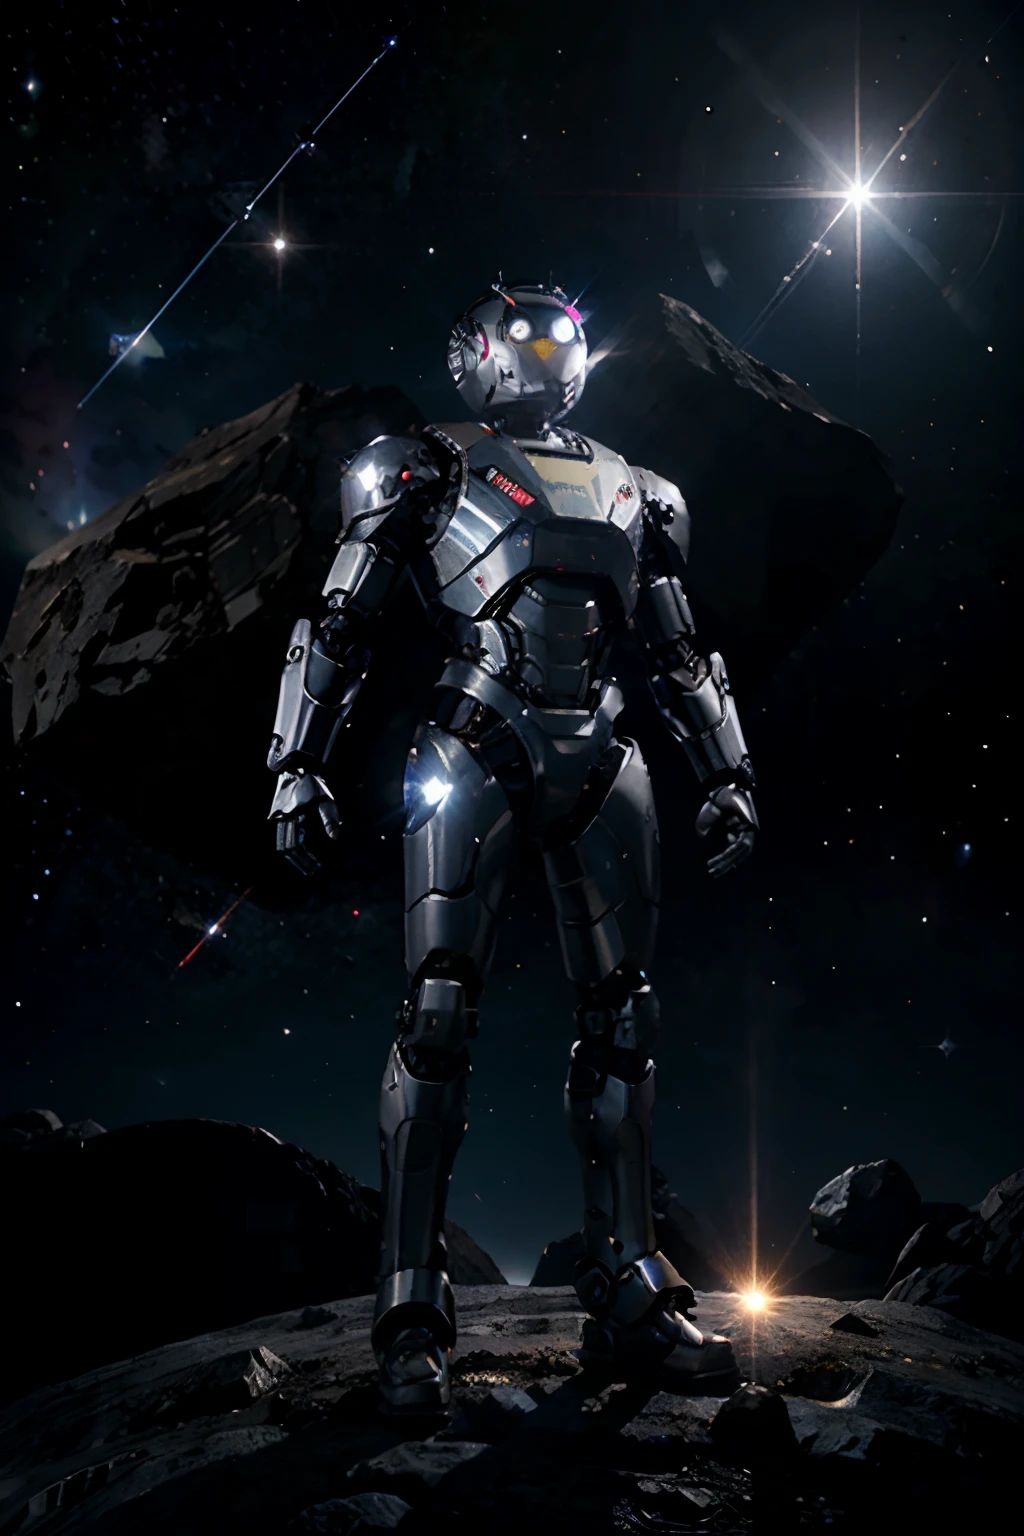 All-metal robot, luzes brilhantes, The robot standing on an asteroid in deep space looking into space.